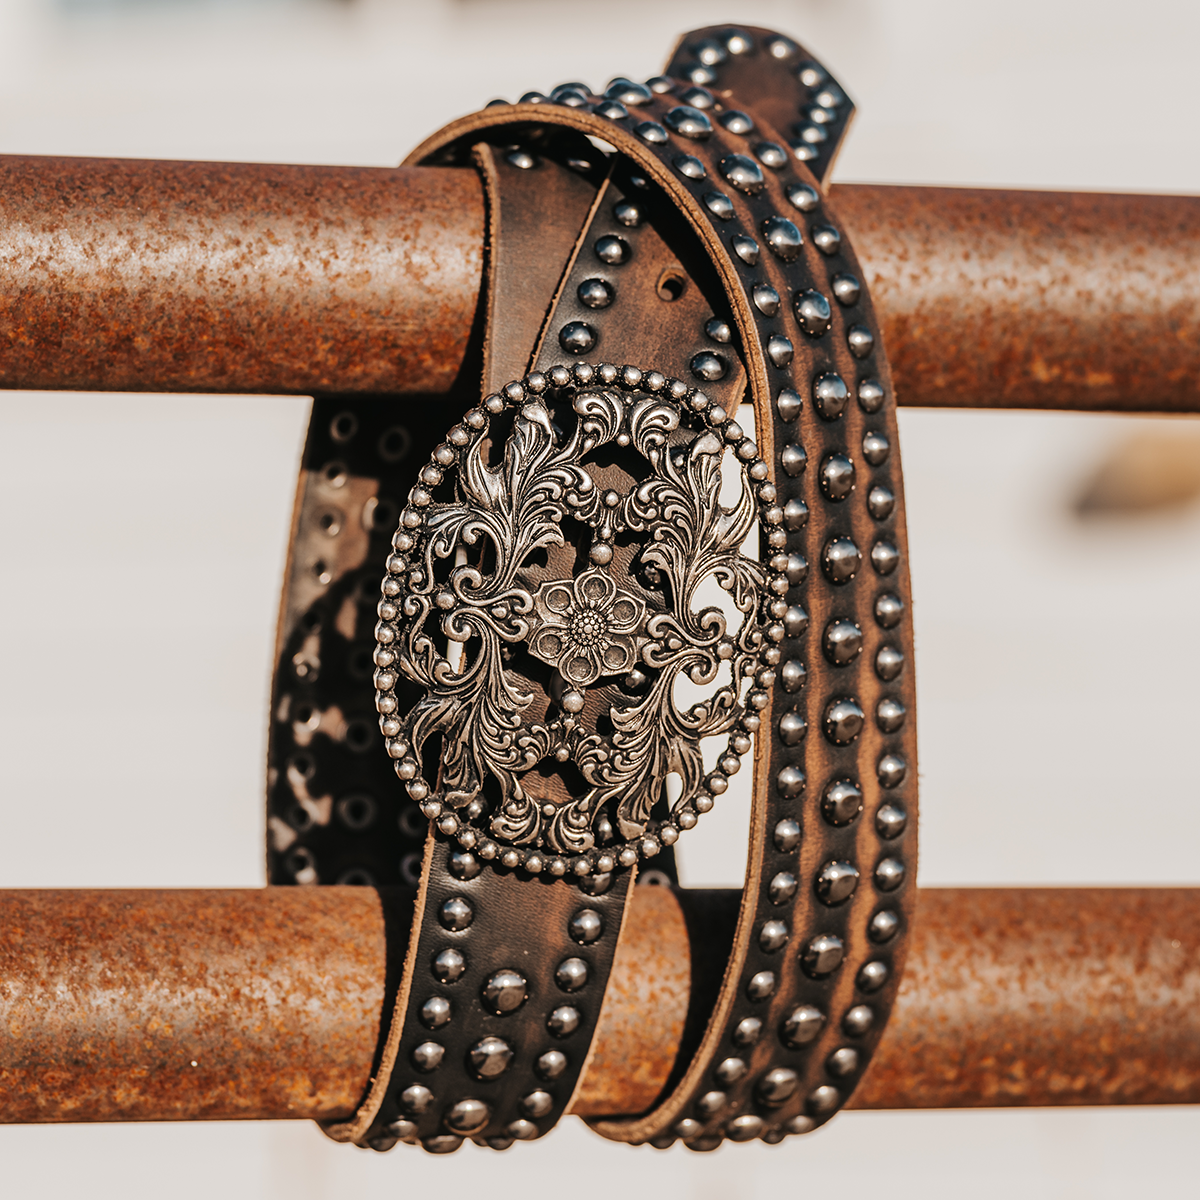 FREEBIRD Iron black distressed full grain leather belt featuring a large cut out metal buckle and embellished detailing lifestyle